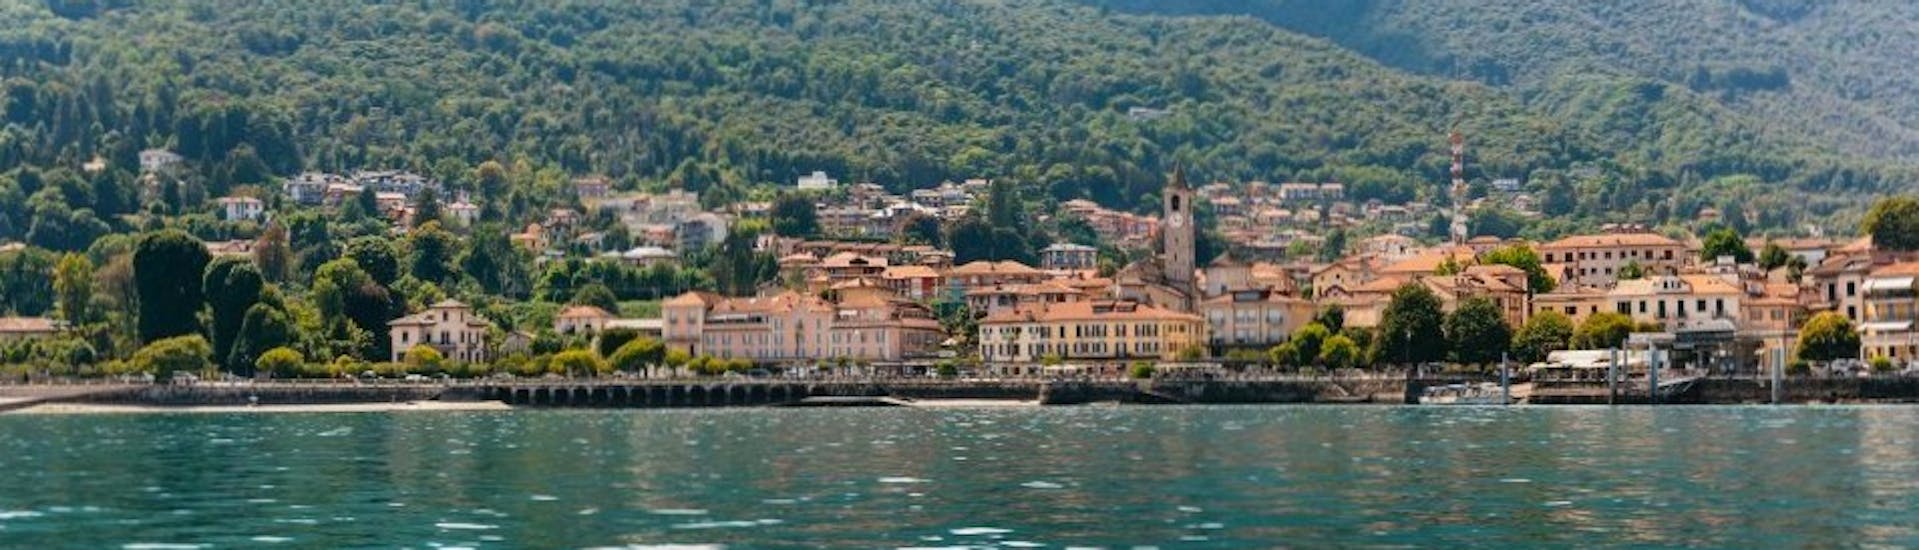 View from the boat with Private Boat Trip from Stresa to Santa Caterina del Sasso.